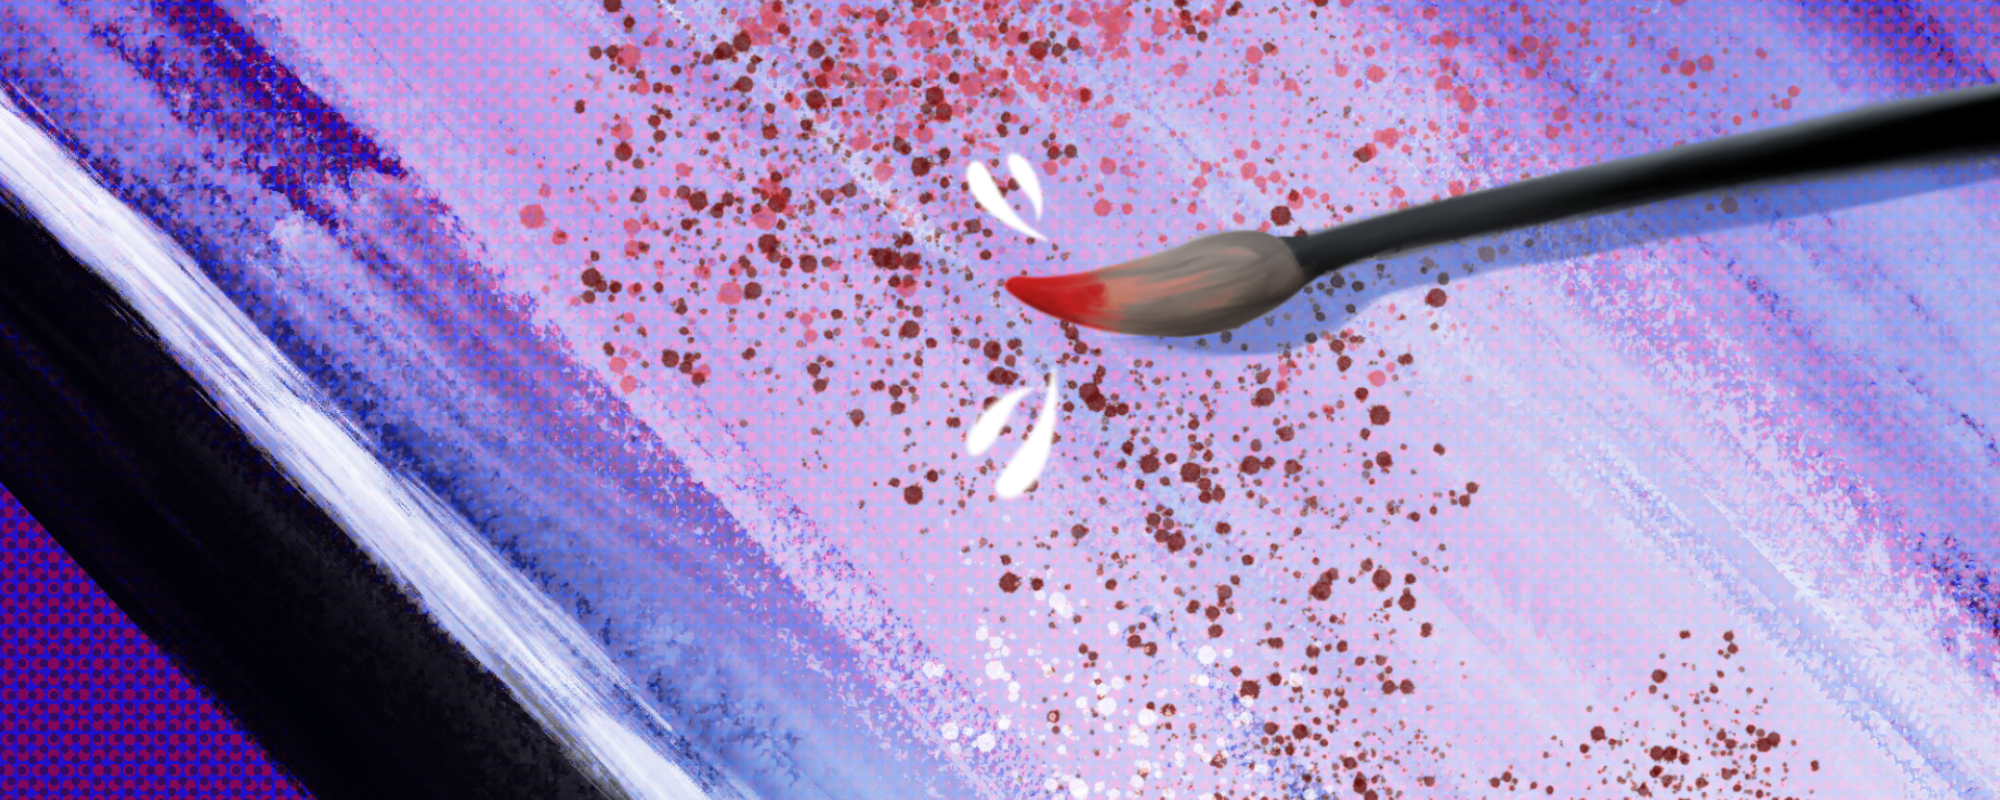 Image of paintbrush with red splatters